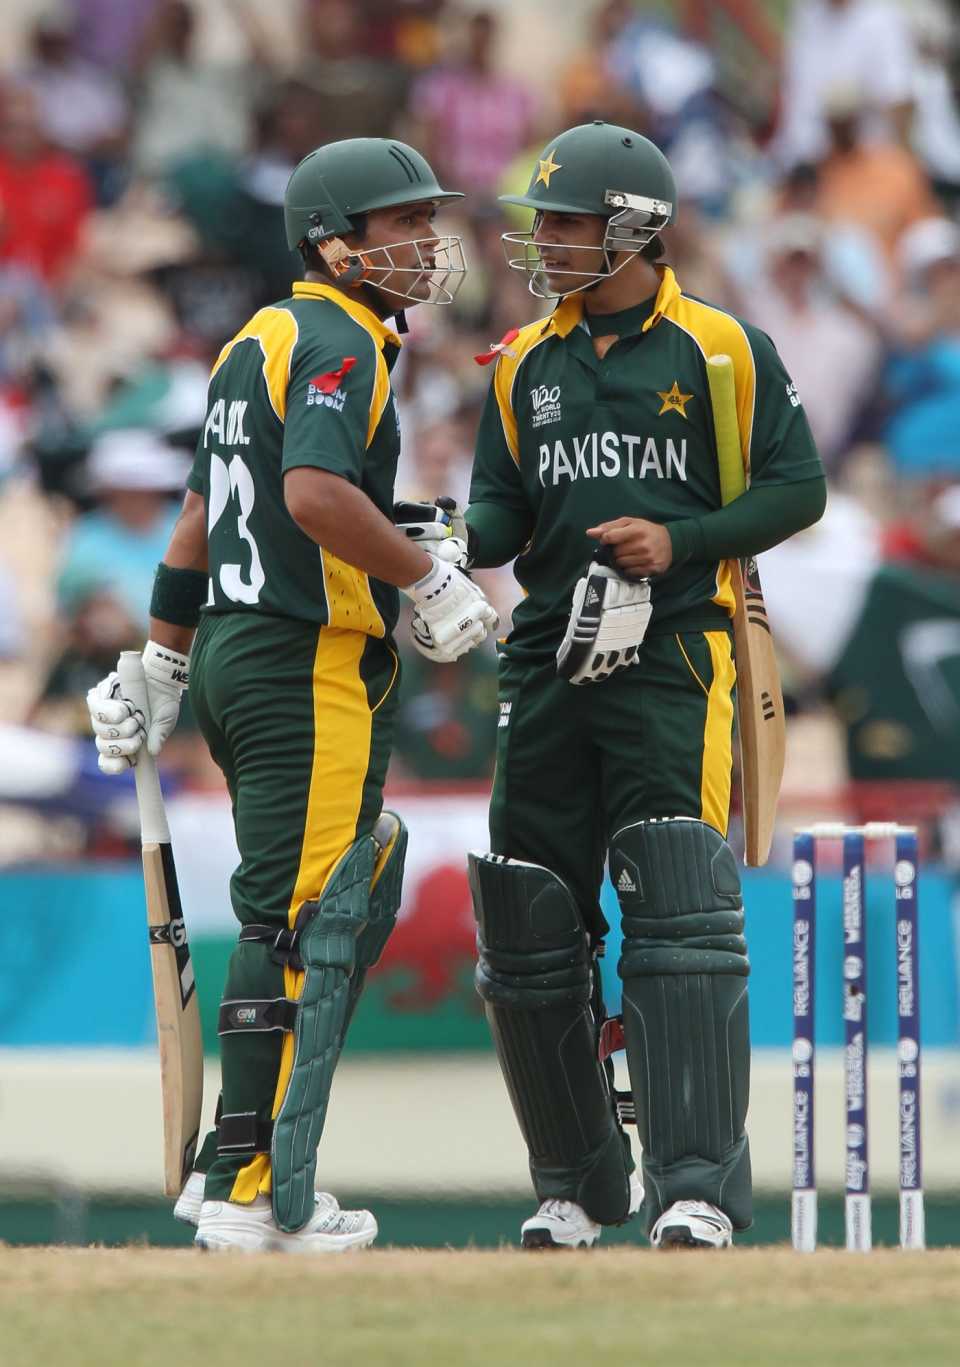 Kamran Akmal and Salman Butt have a mid-pitch chat